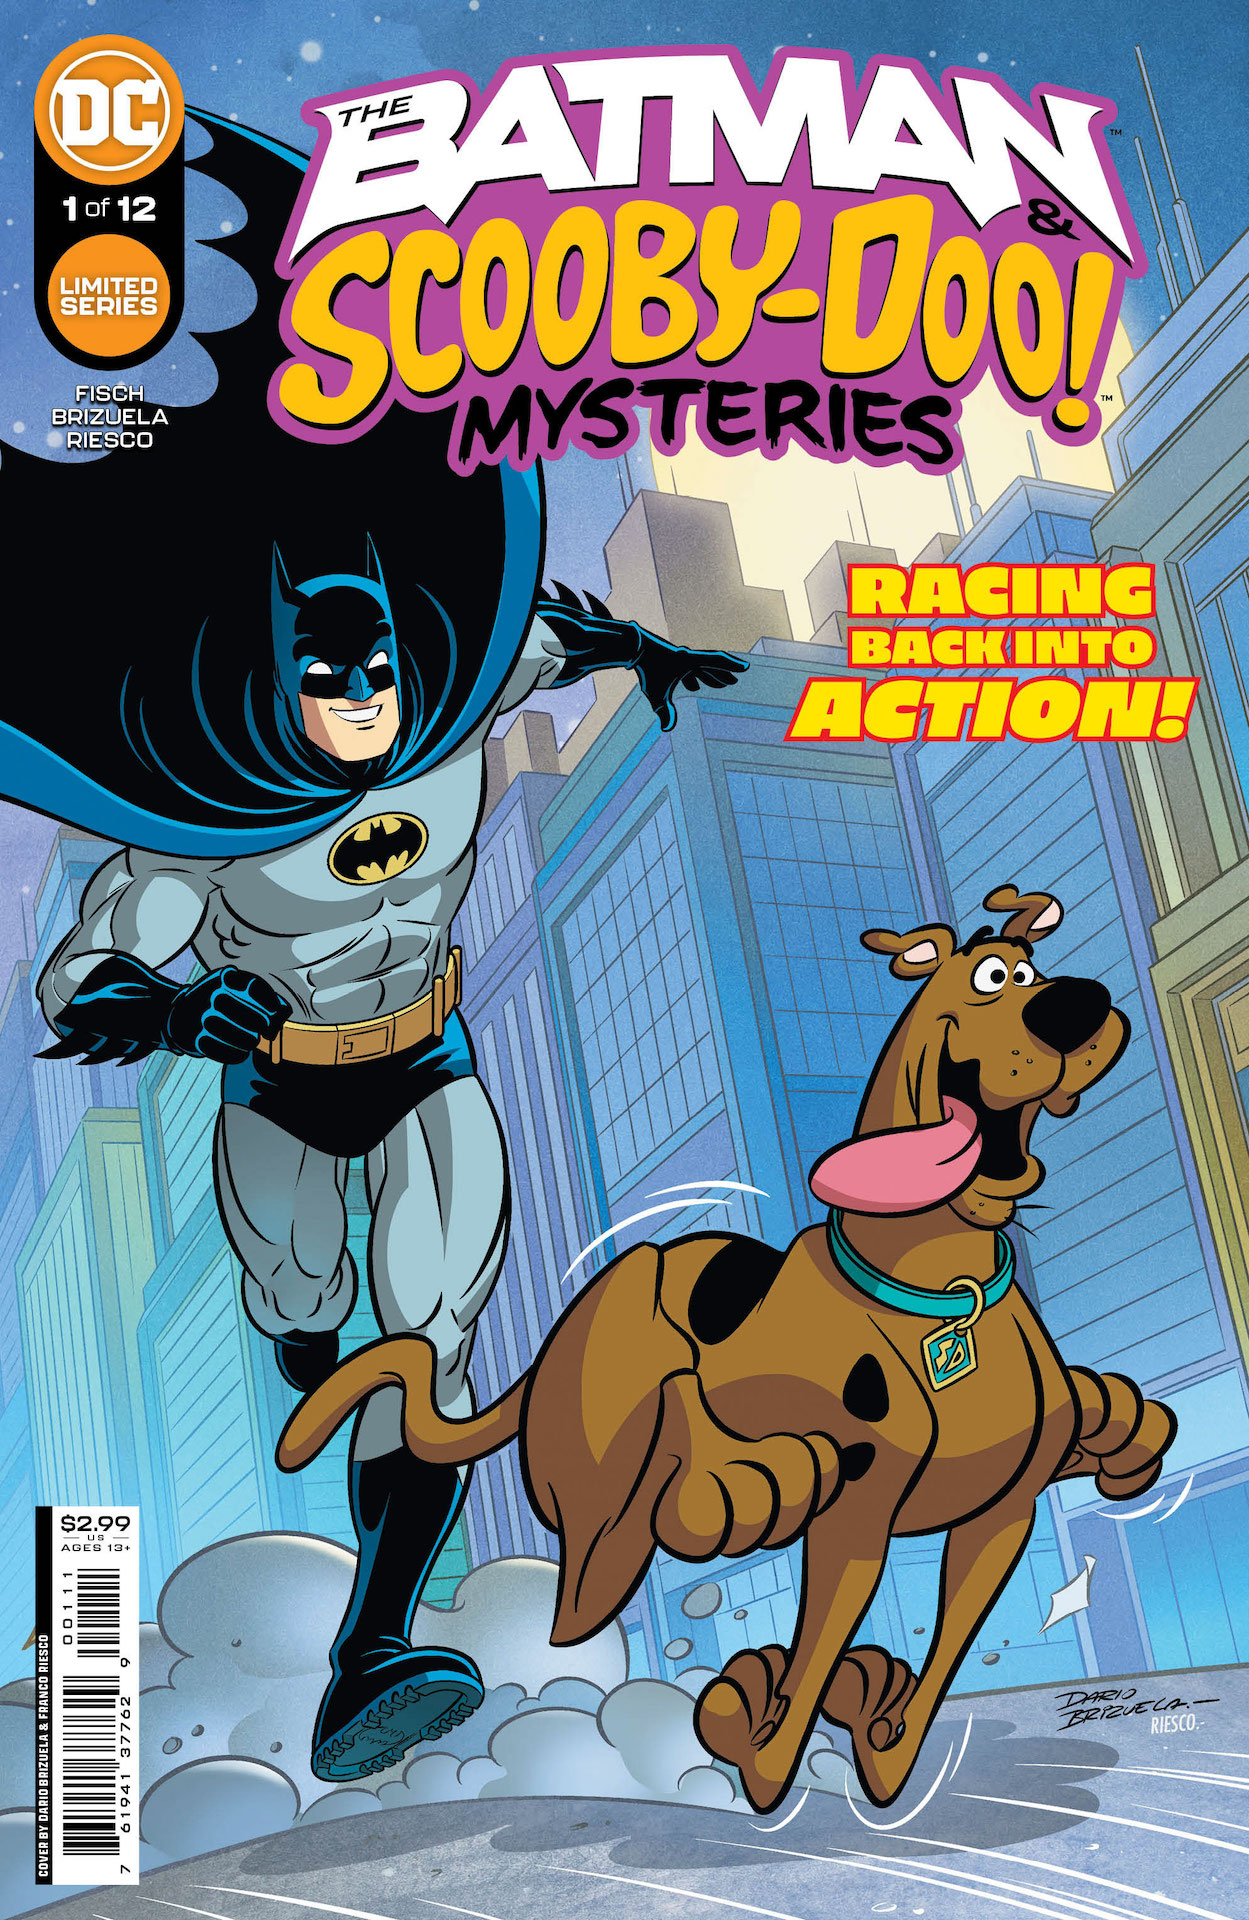 EXCLUSIVE DC Preview: The Batman & Scooby-Doo Mysteries #1